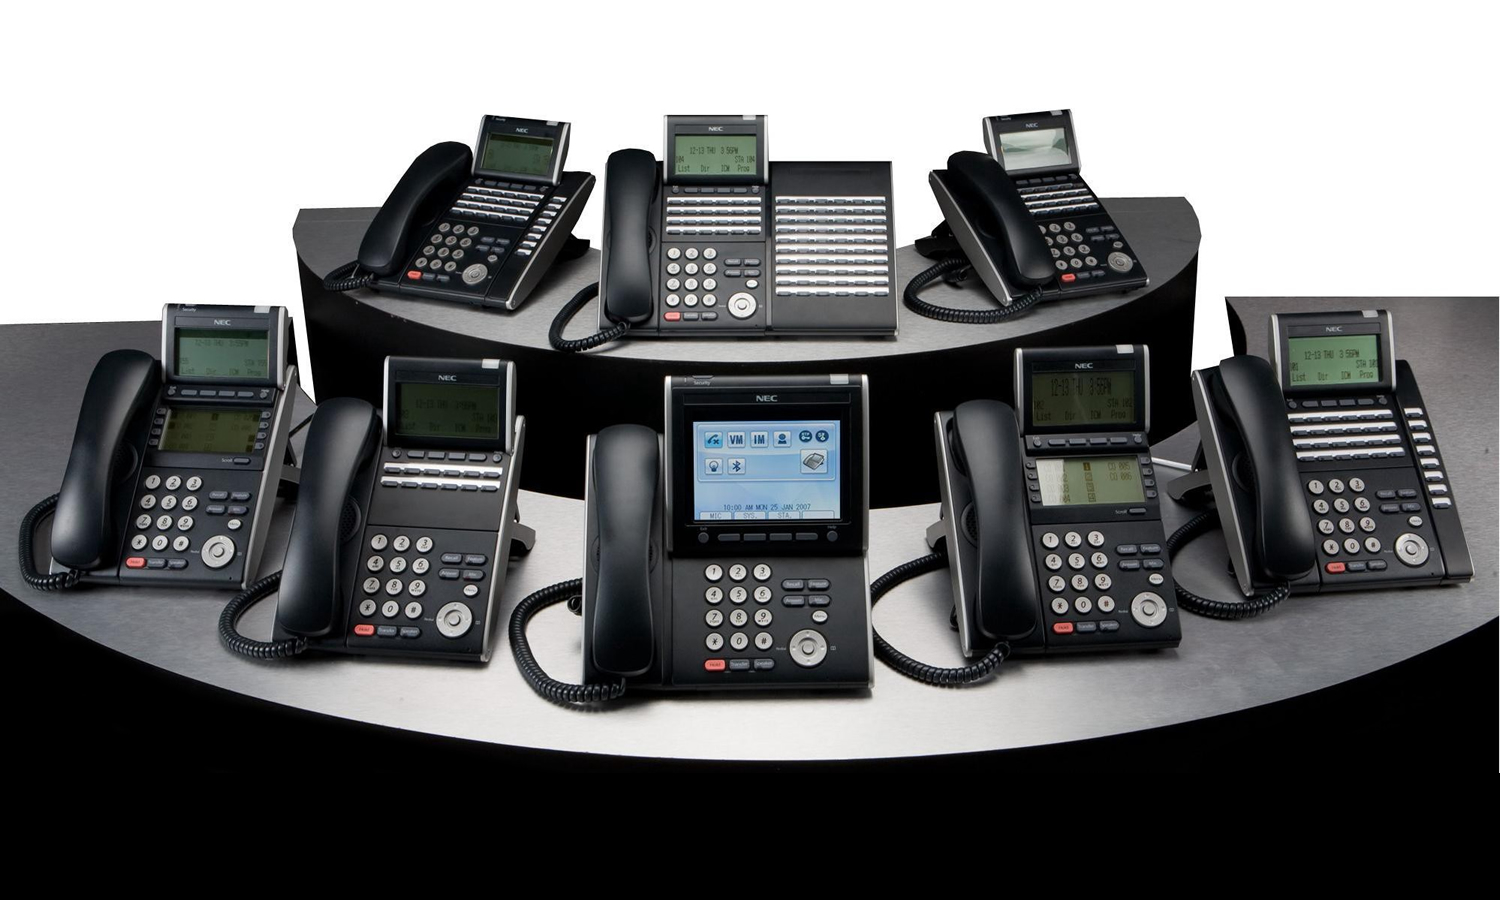 TELEPHONE SYSTEMS
